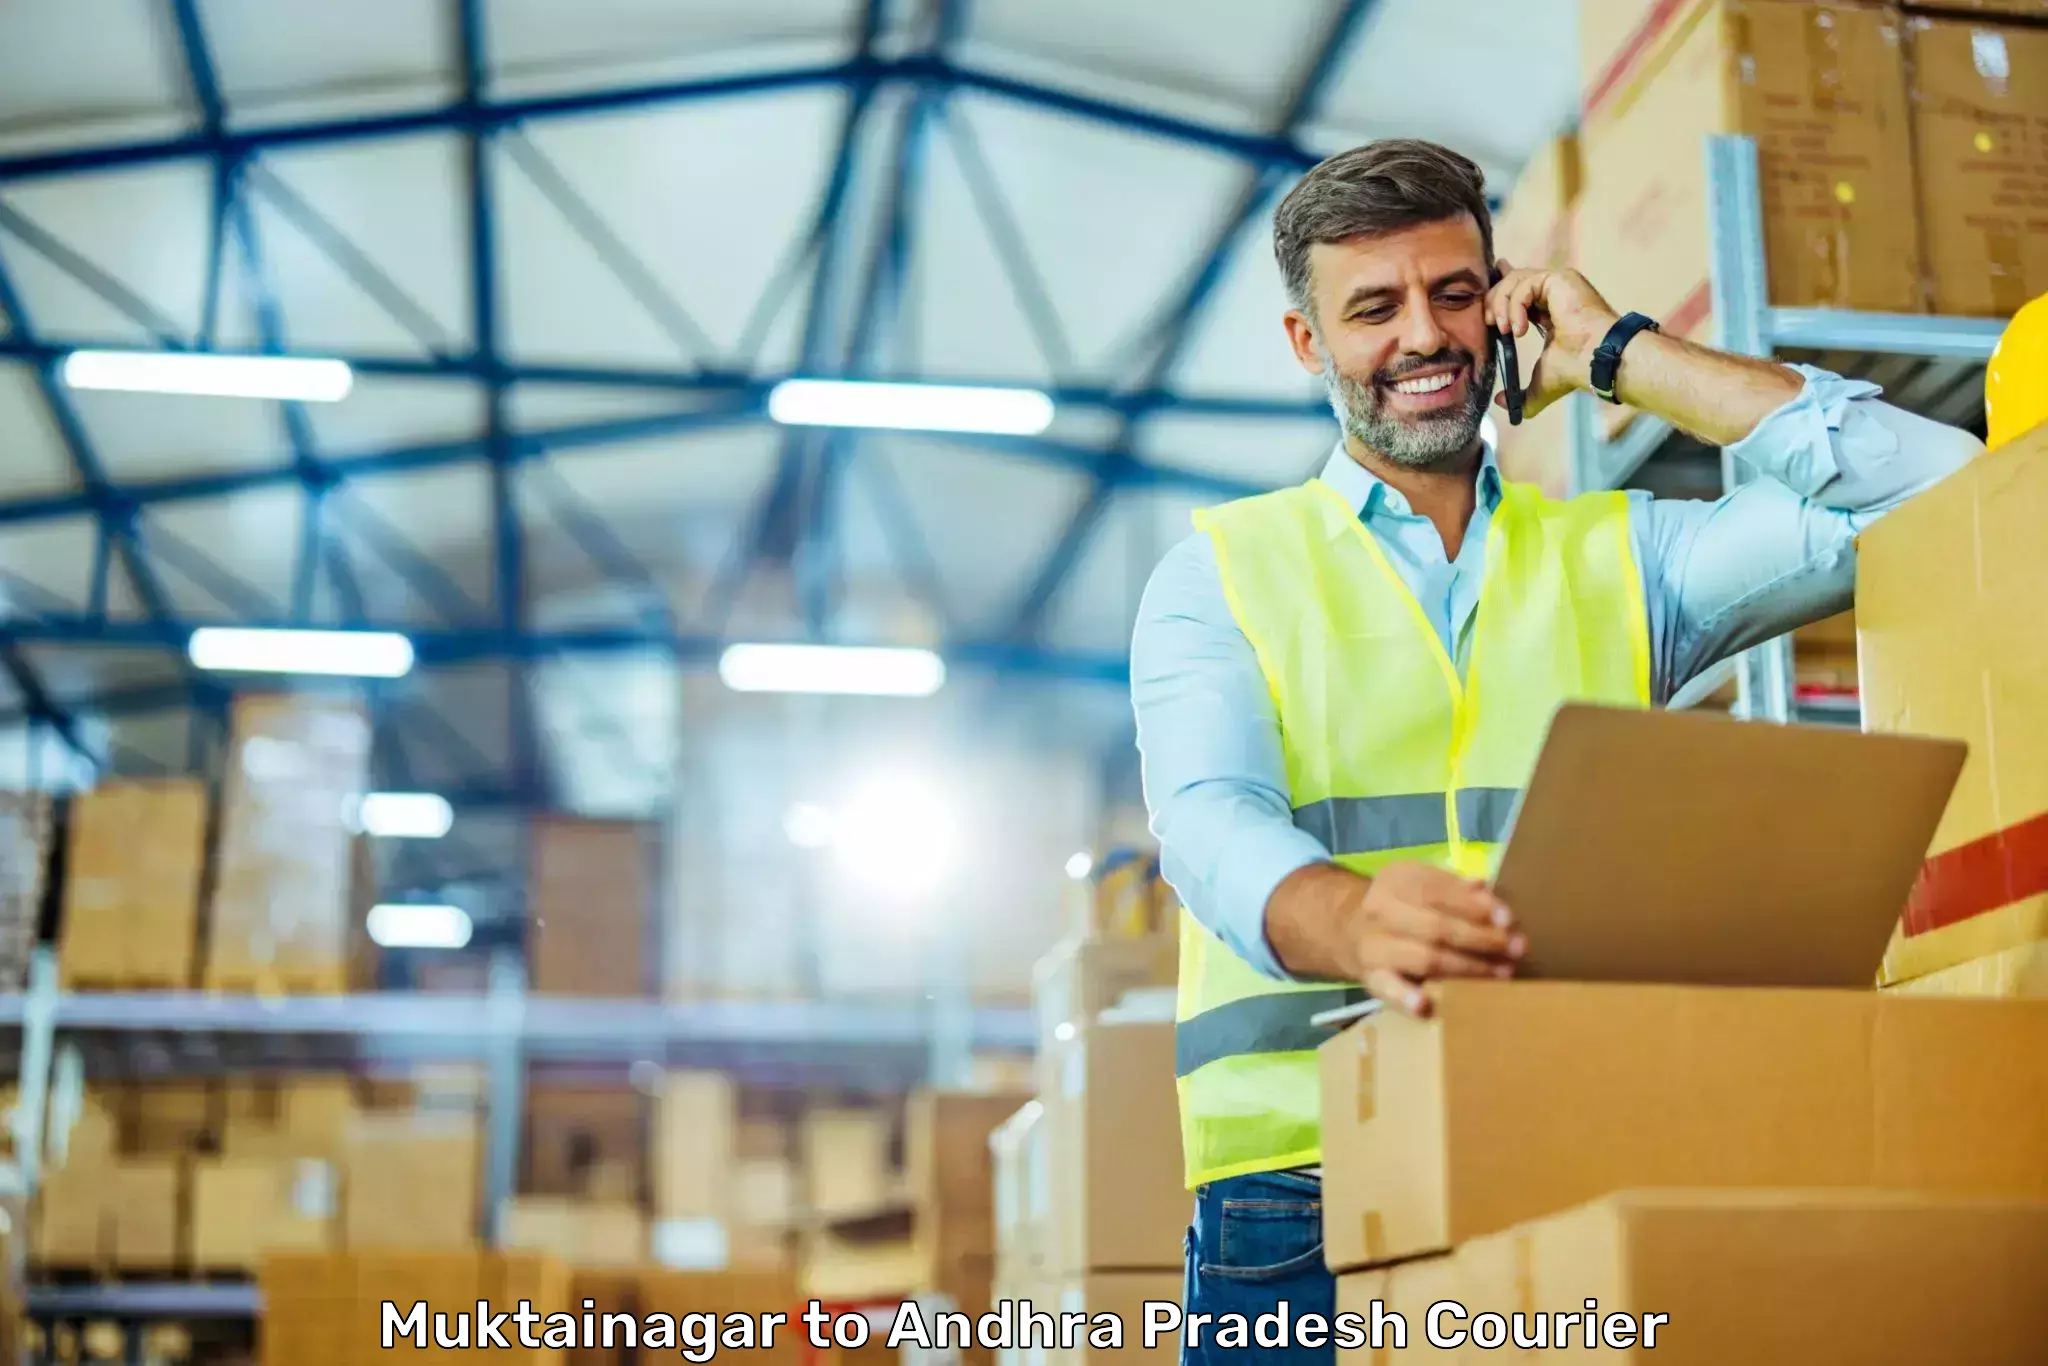 On-call courier service Muktainagar to Visakhapatnam Port